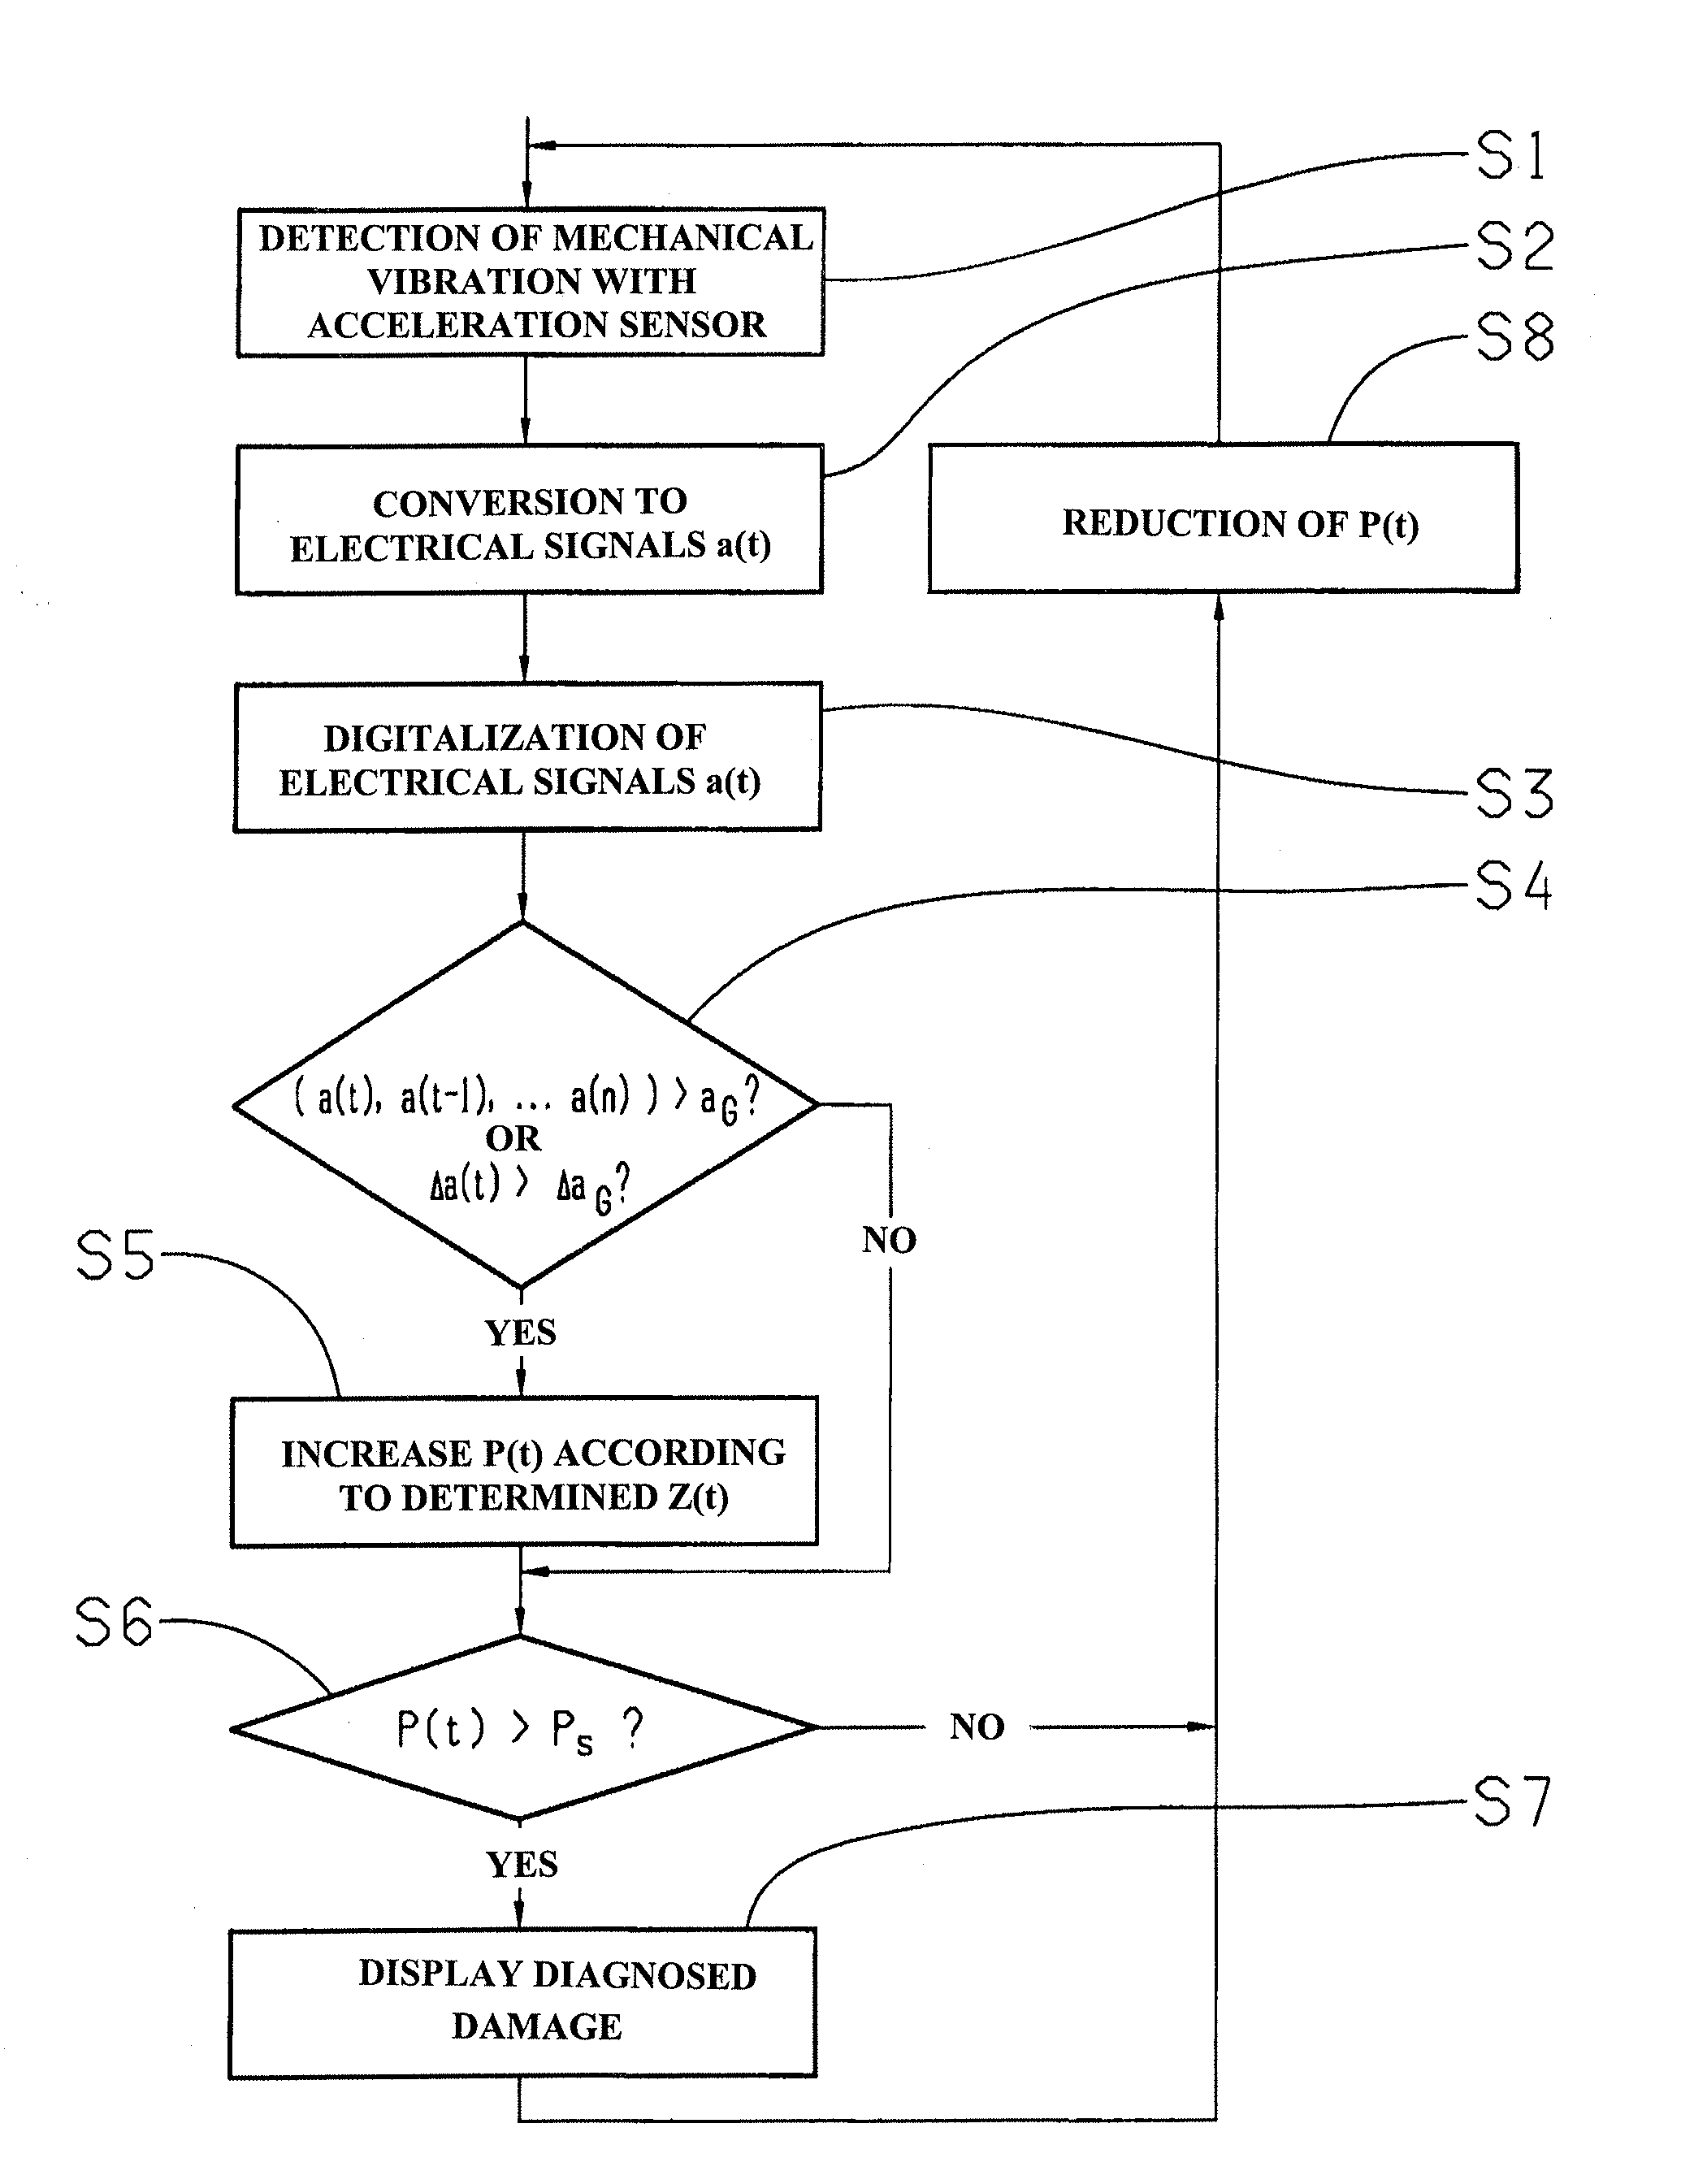 Method for early detection of damage in a motor vehicle transmission